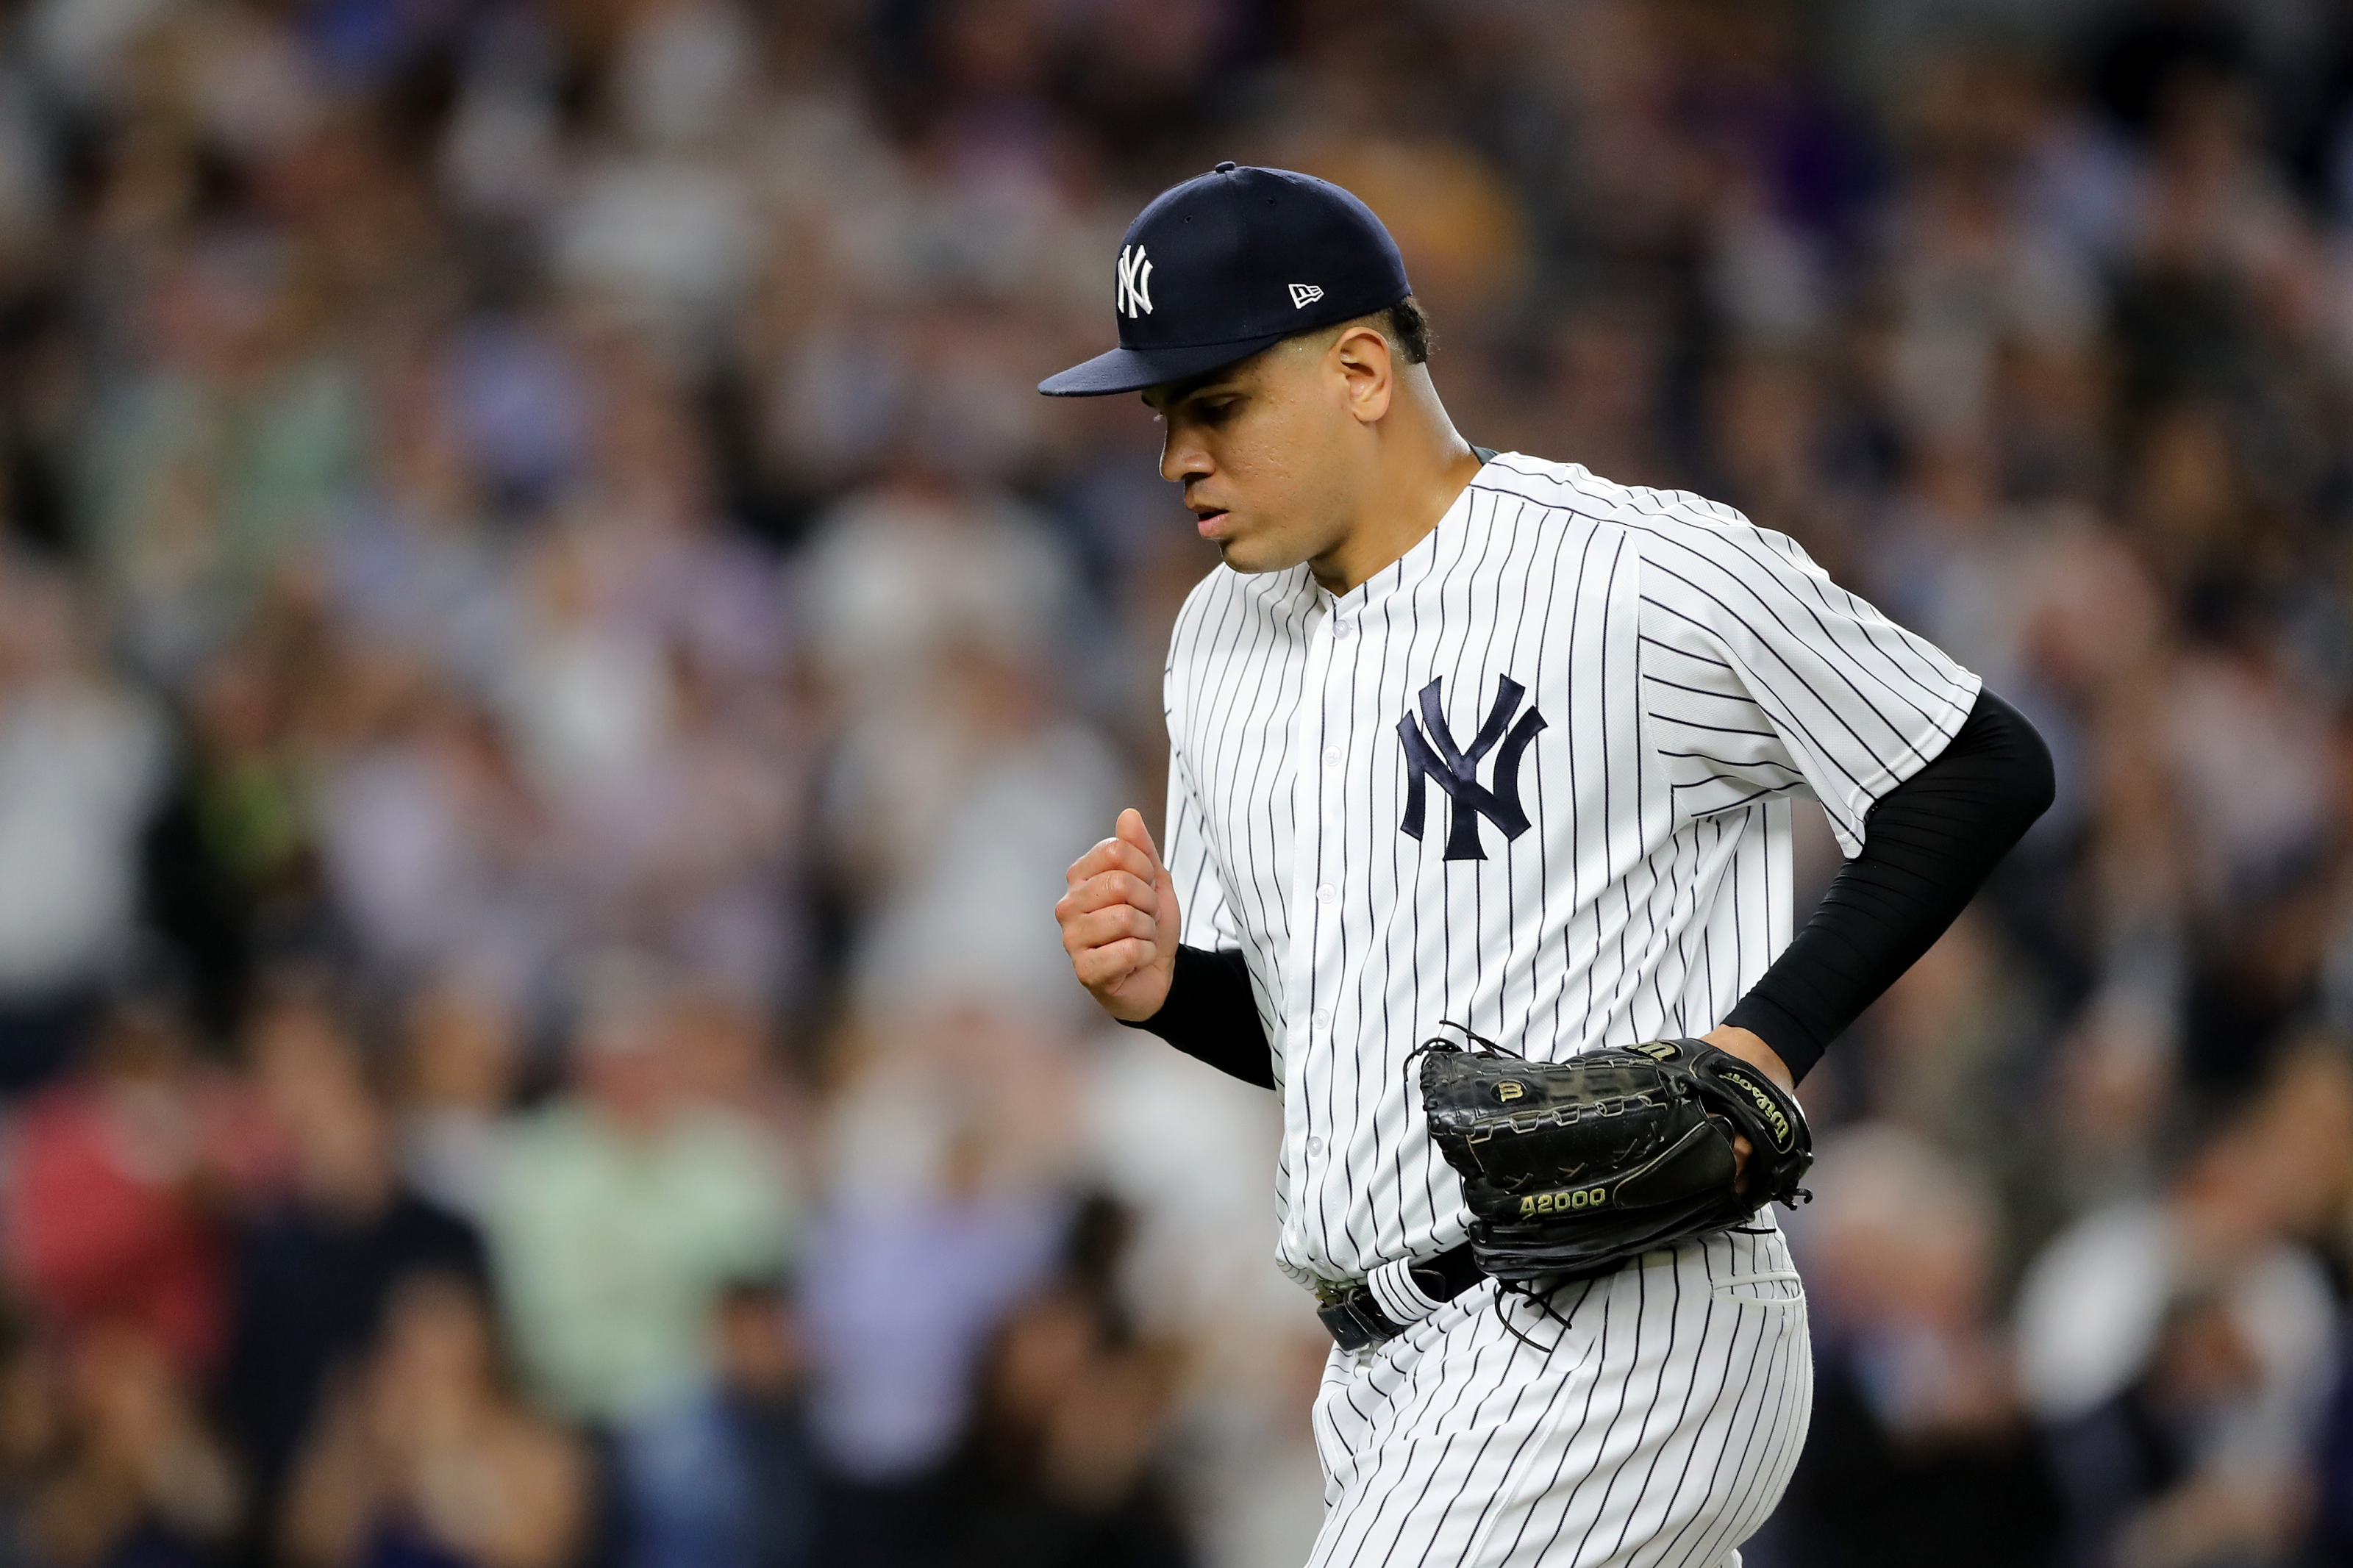 Los Angeles Dodgers Rumors: Delin Betances and what else to expect